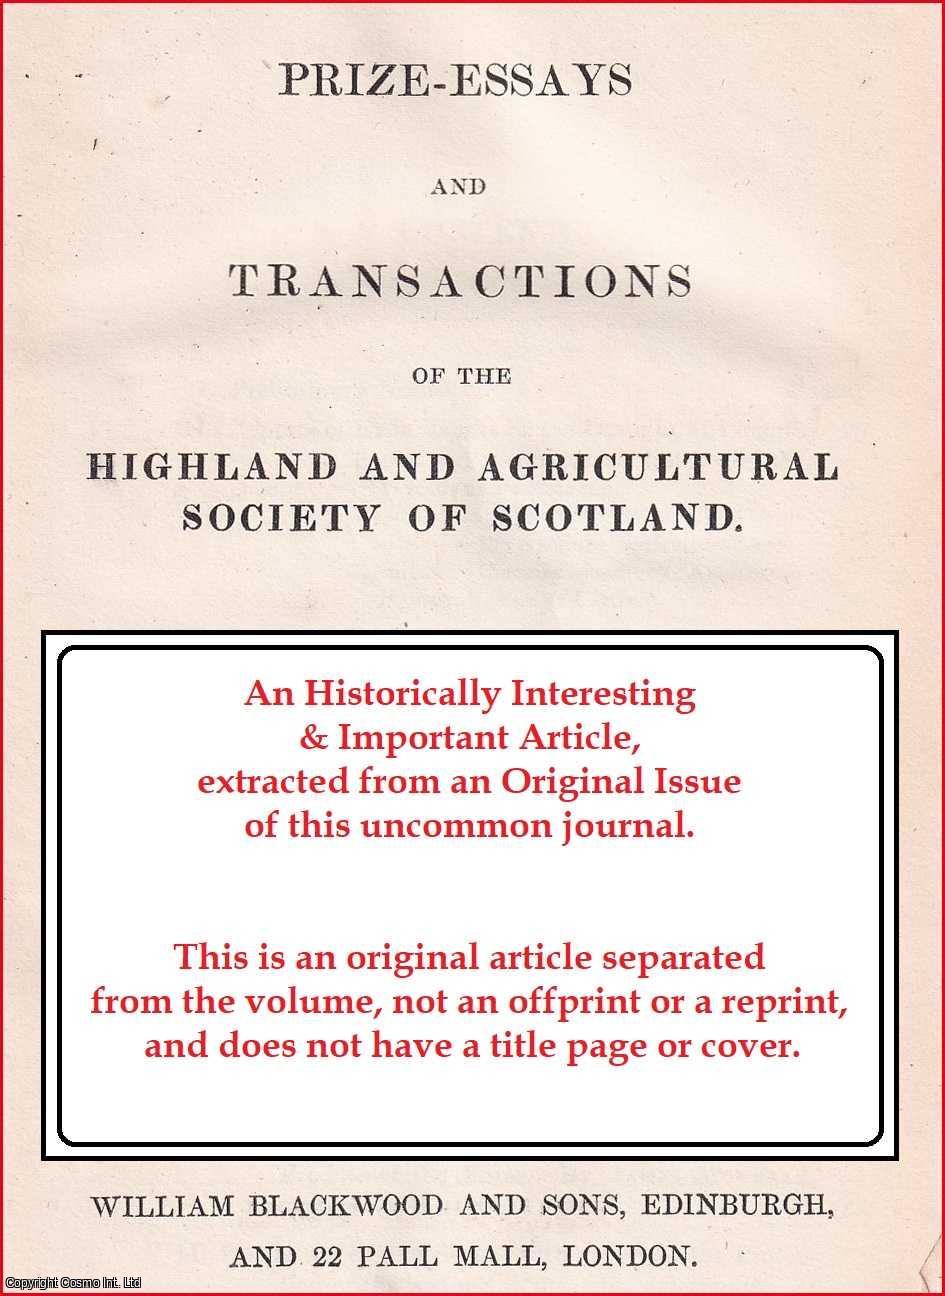 Mr. Alex Smith - 152 Acres, 2 Roods, Scotch, on the Mains of Crombie, Parish of Marnoch, Banffshire : the Improvement of Waste Land. An uncommon original article from the Prize Essays and Transactions of the Highland Society of Scotland, 1841.